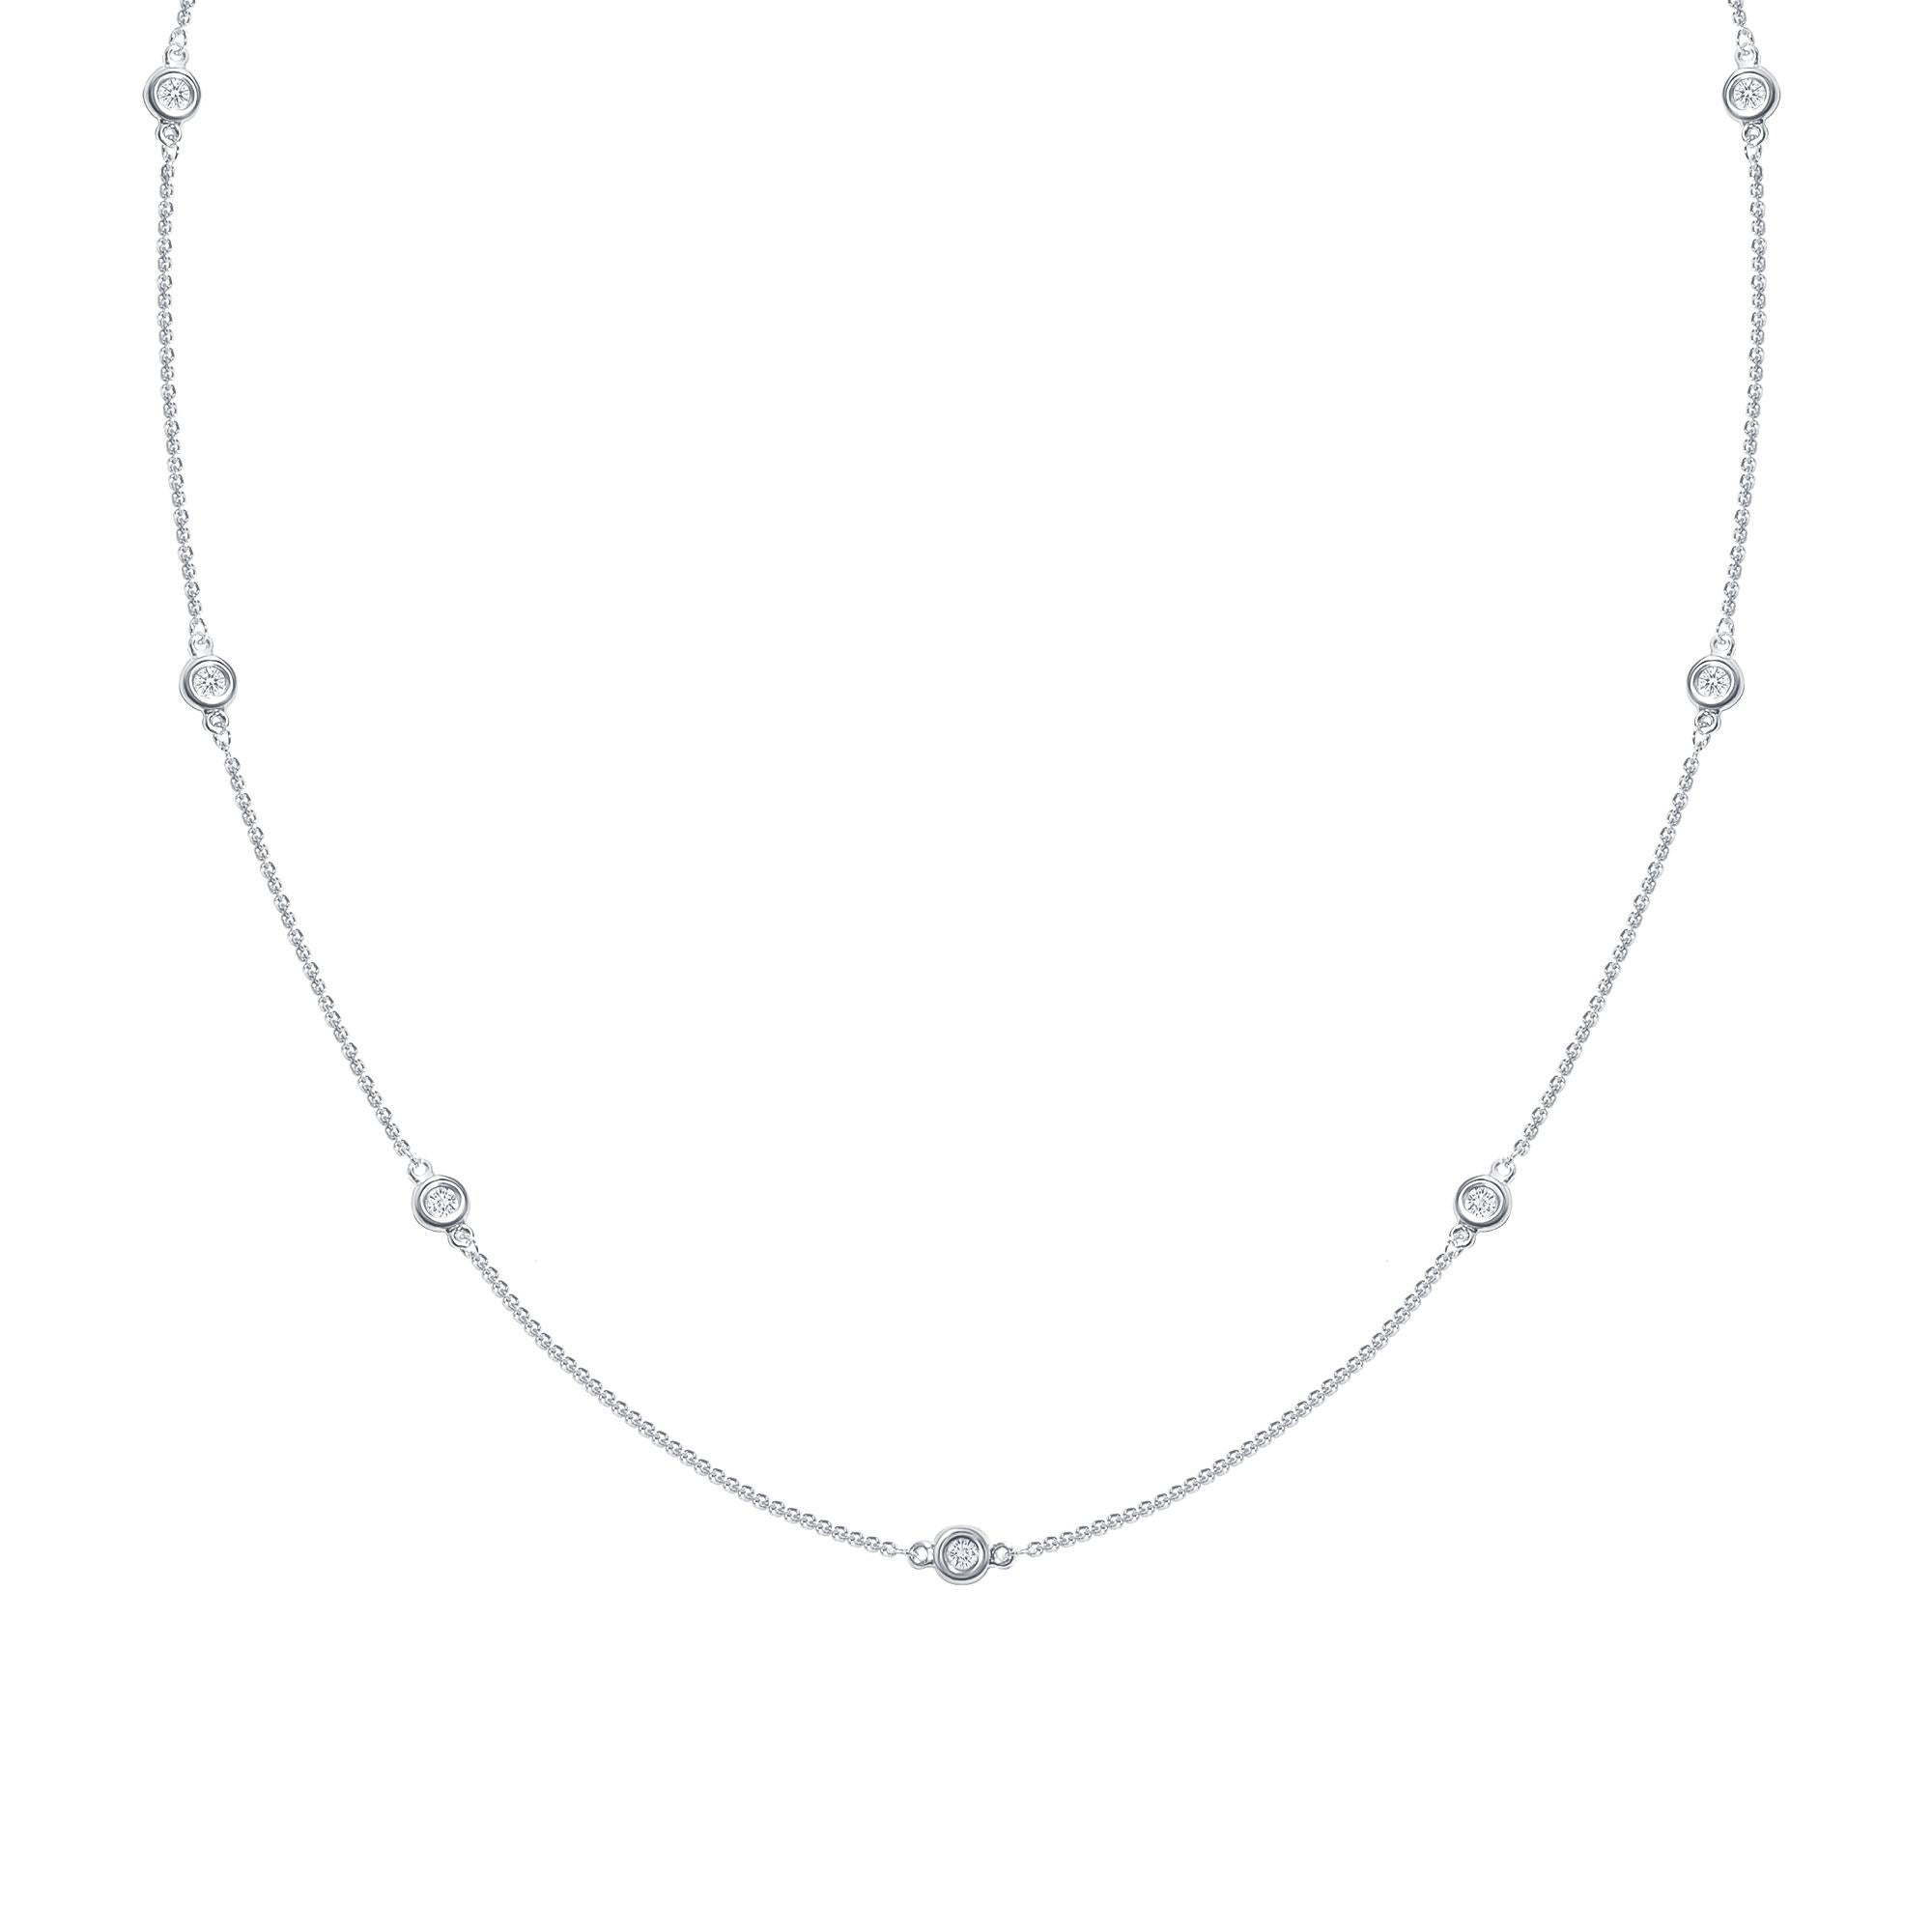 Eight elegant round diamonds set in a bezel setting along a 14k gold chain necklace.

Gold: 14K Gold
Number of Diamonds: Eight
Gold Color: White Gold
Carat: 1 Carat
Necklace Length: 24 Inches
Diamond Clarity: VS
Diamond Color: F
Chain Type: